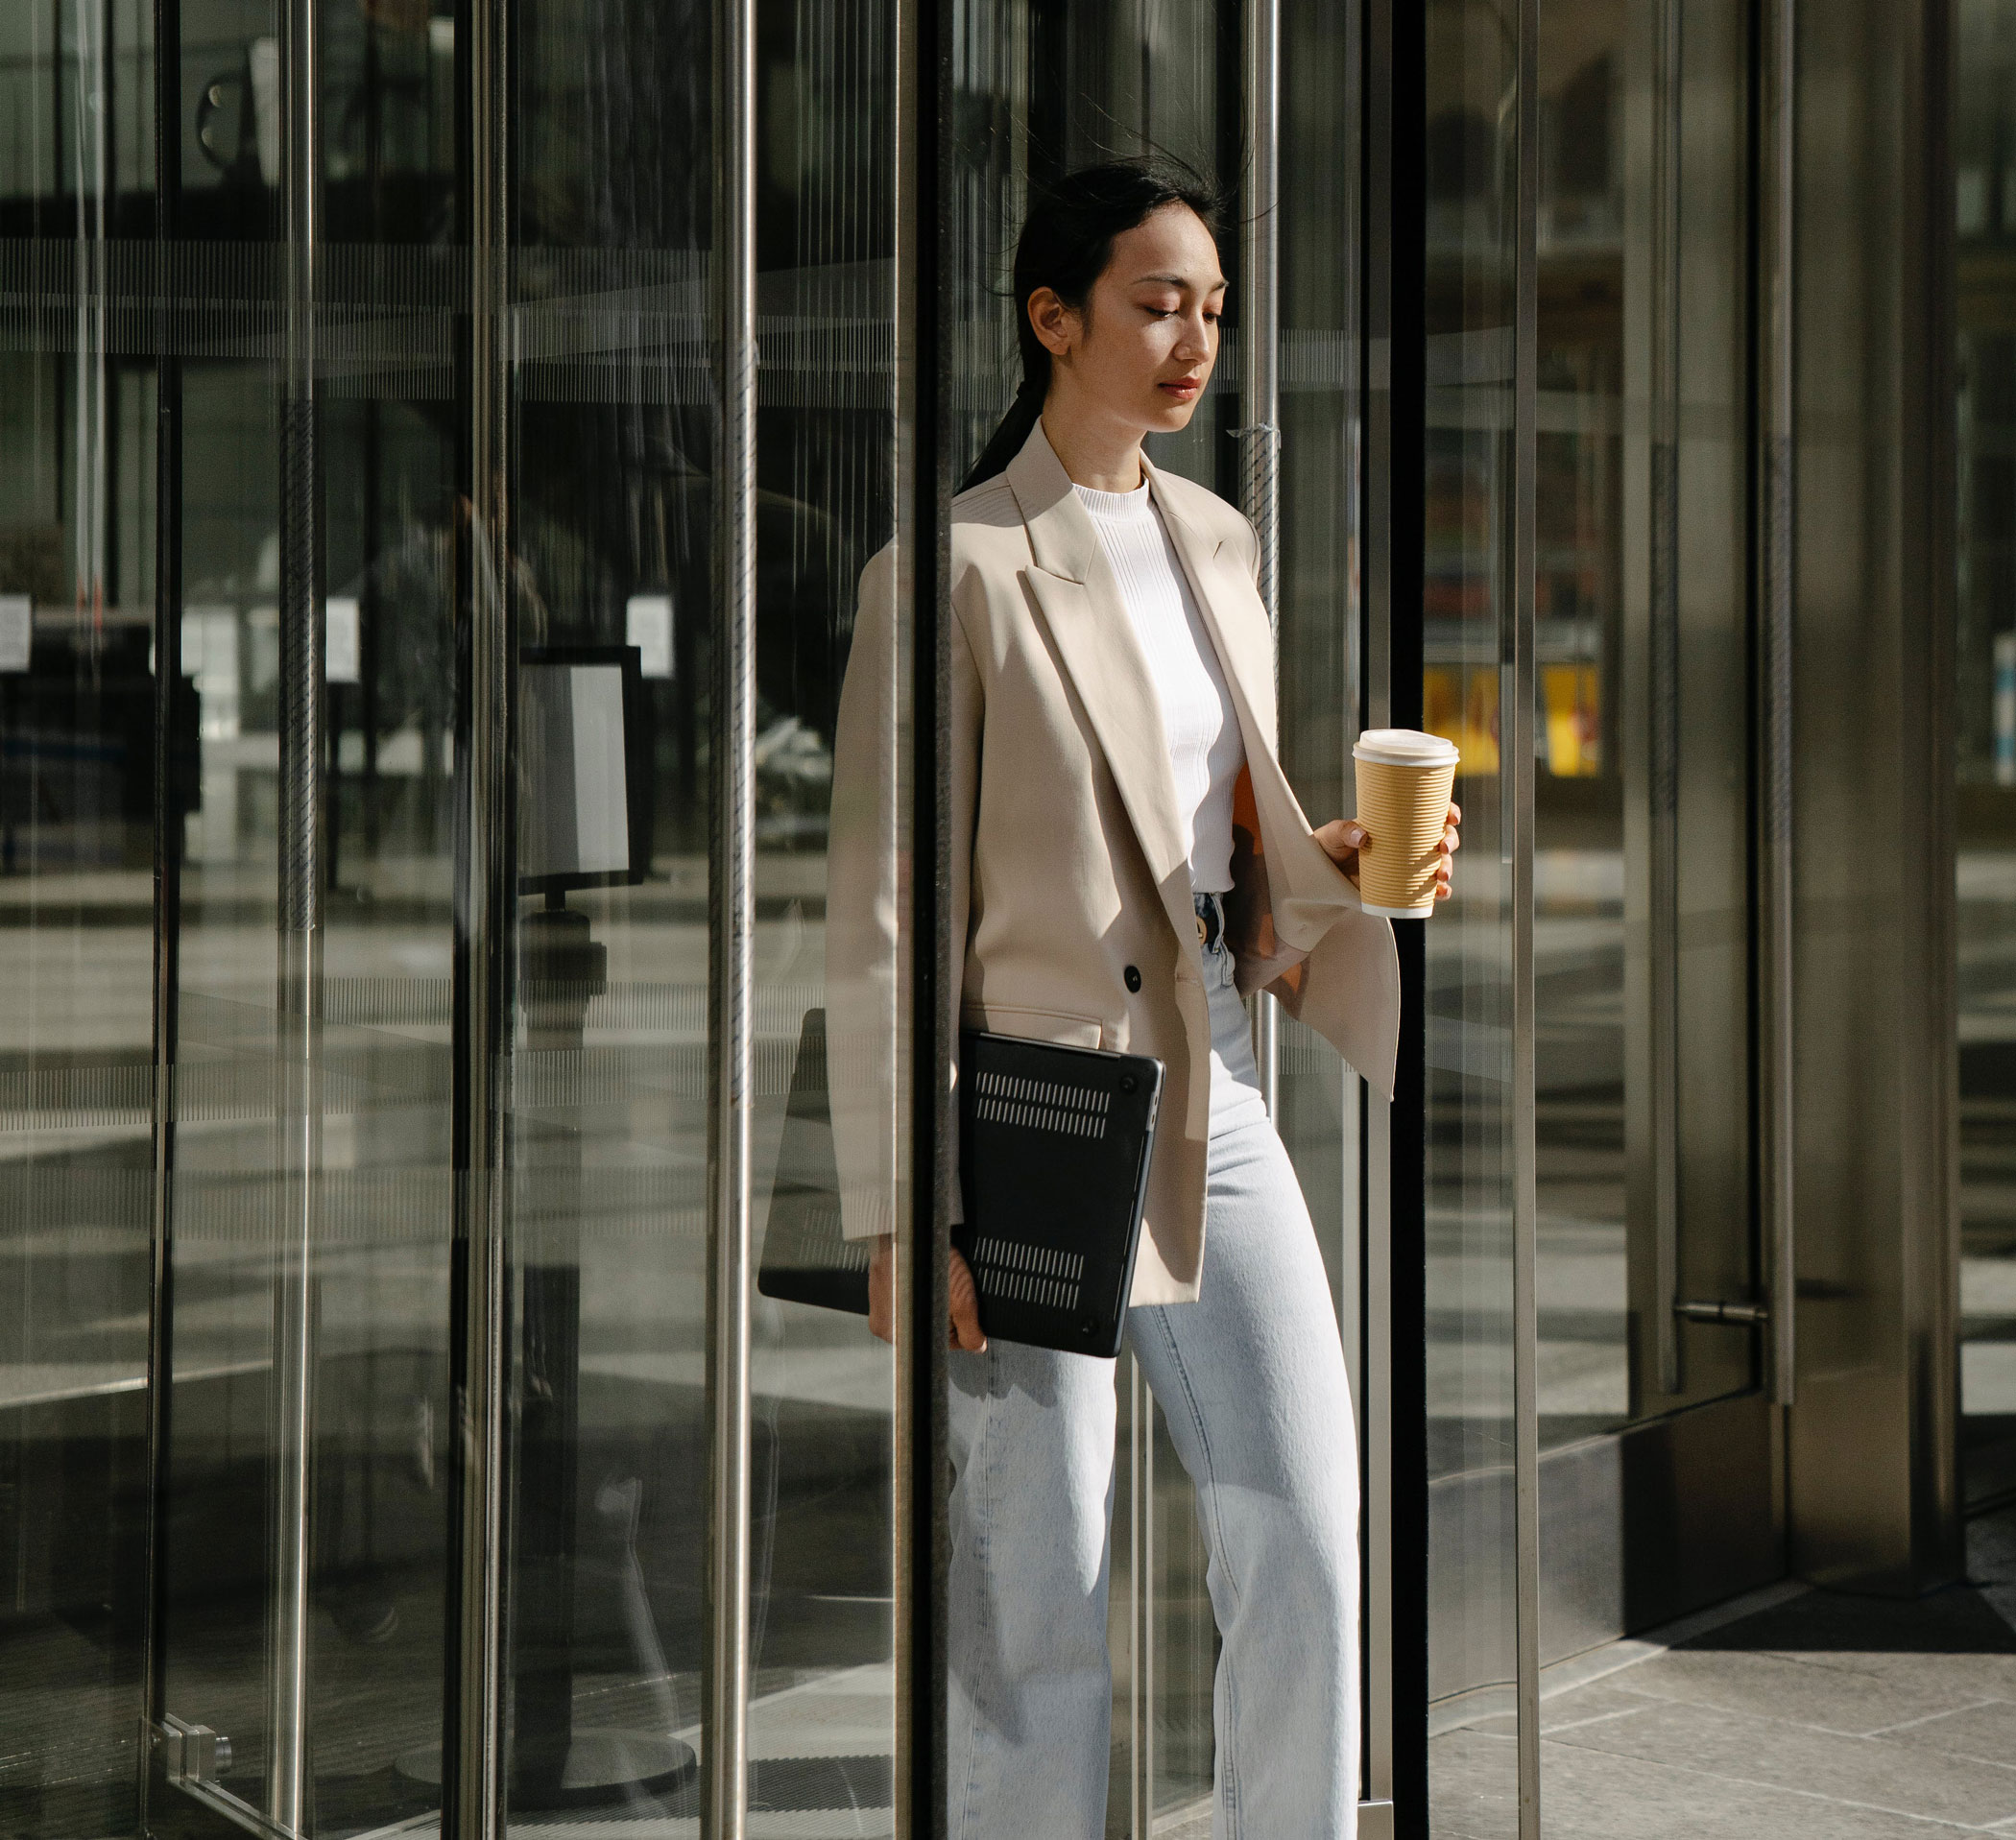 A woman holding a laptop in one hand and to-go coffee mug walking out a glass door.